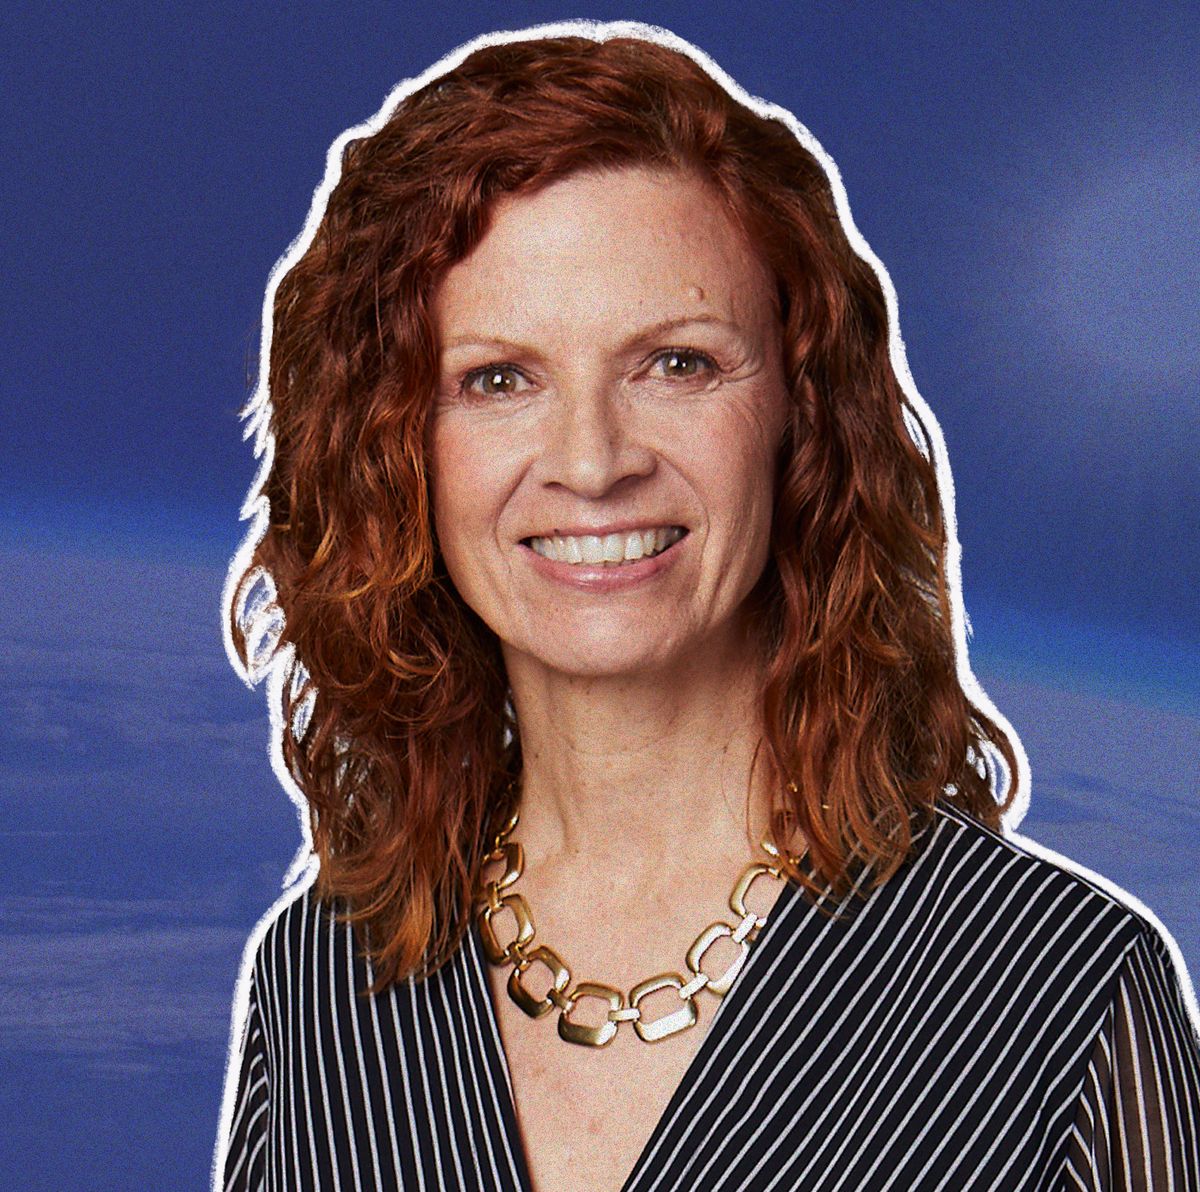 space perspective founder jane poynter